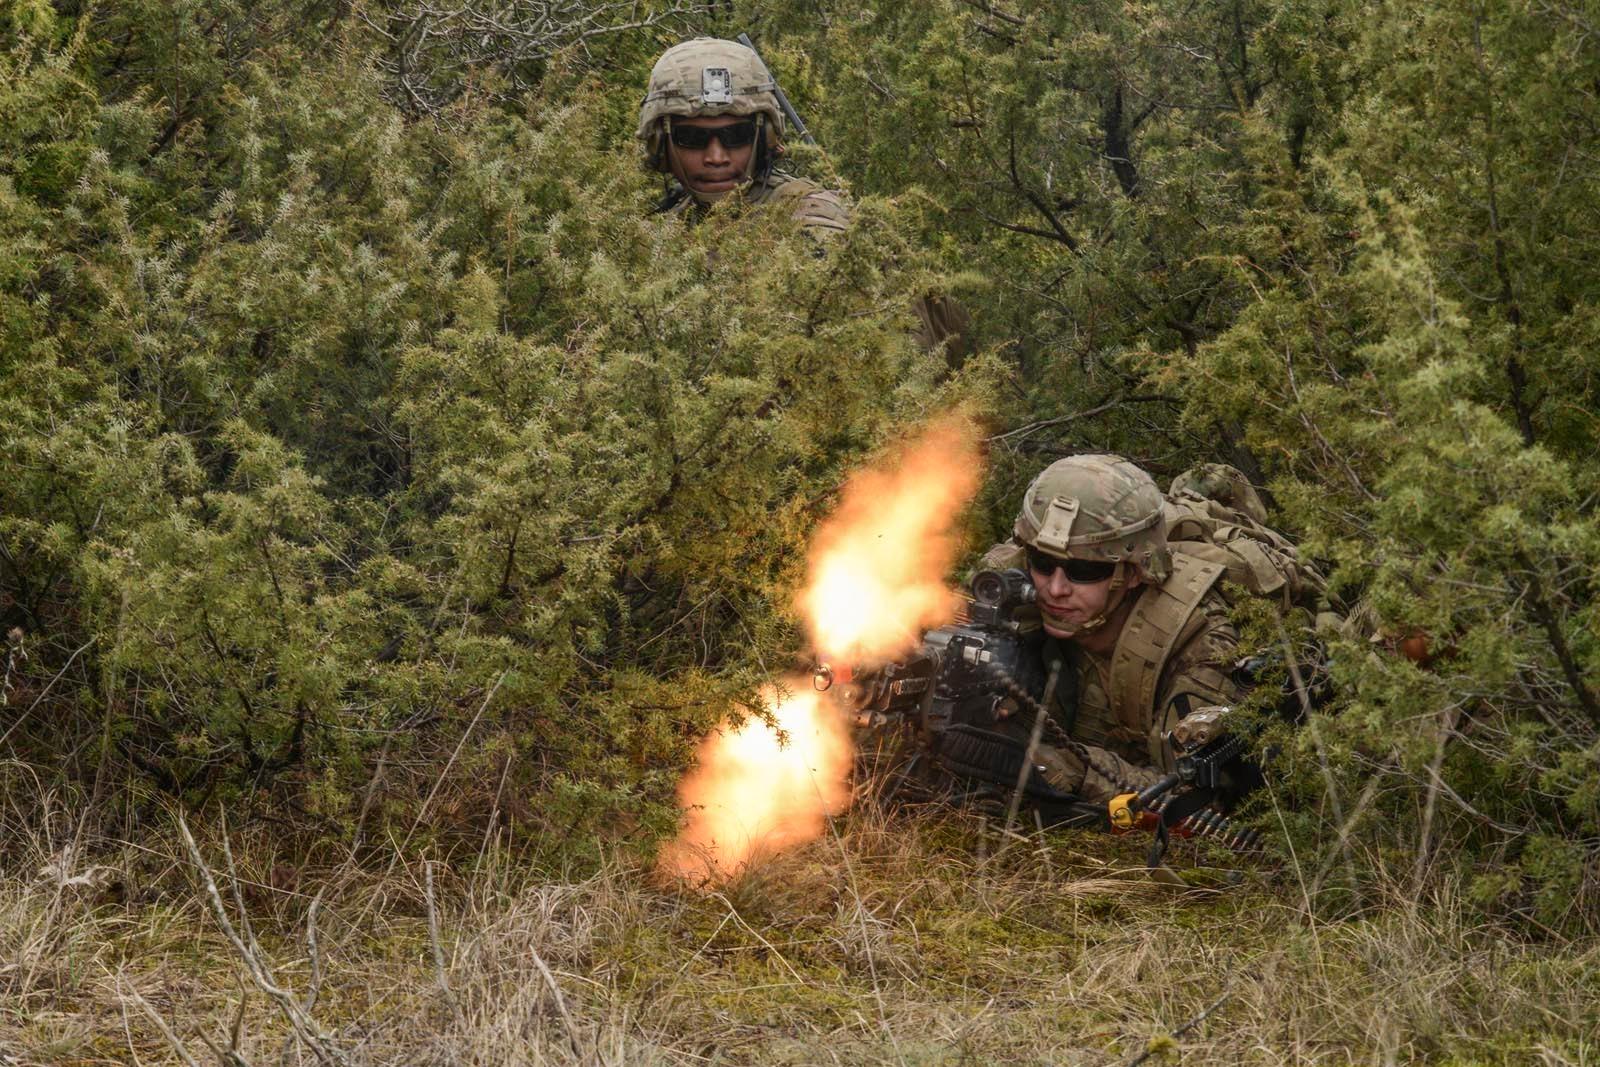 Two soldiers hunch down in a bush. The photo displays the bullets from one of the guns mid-fire.